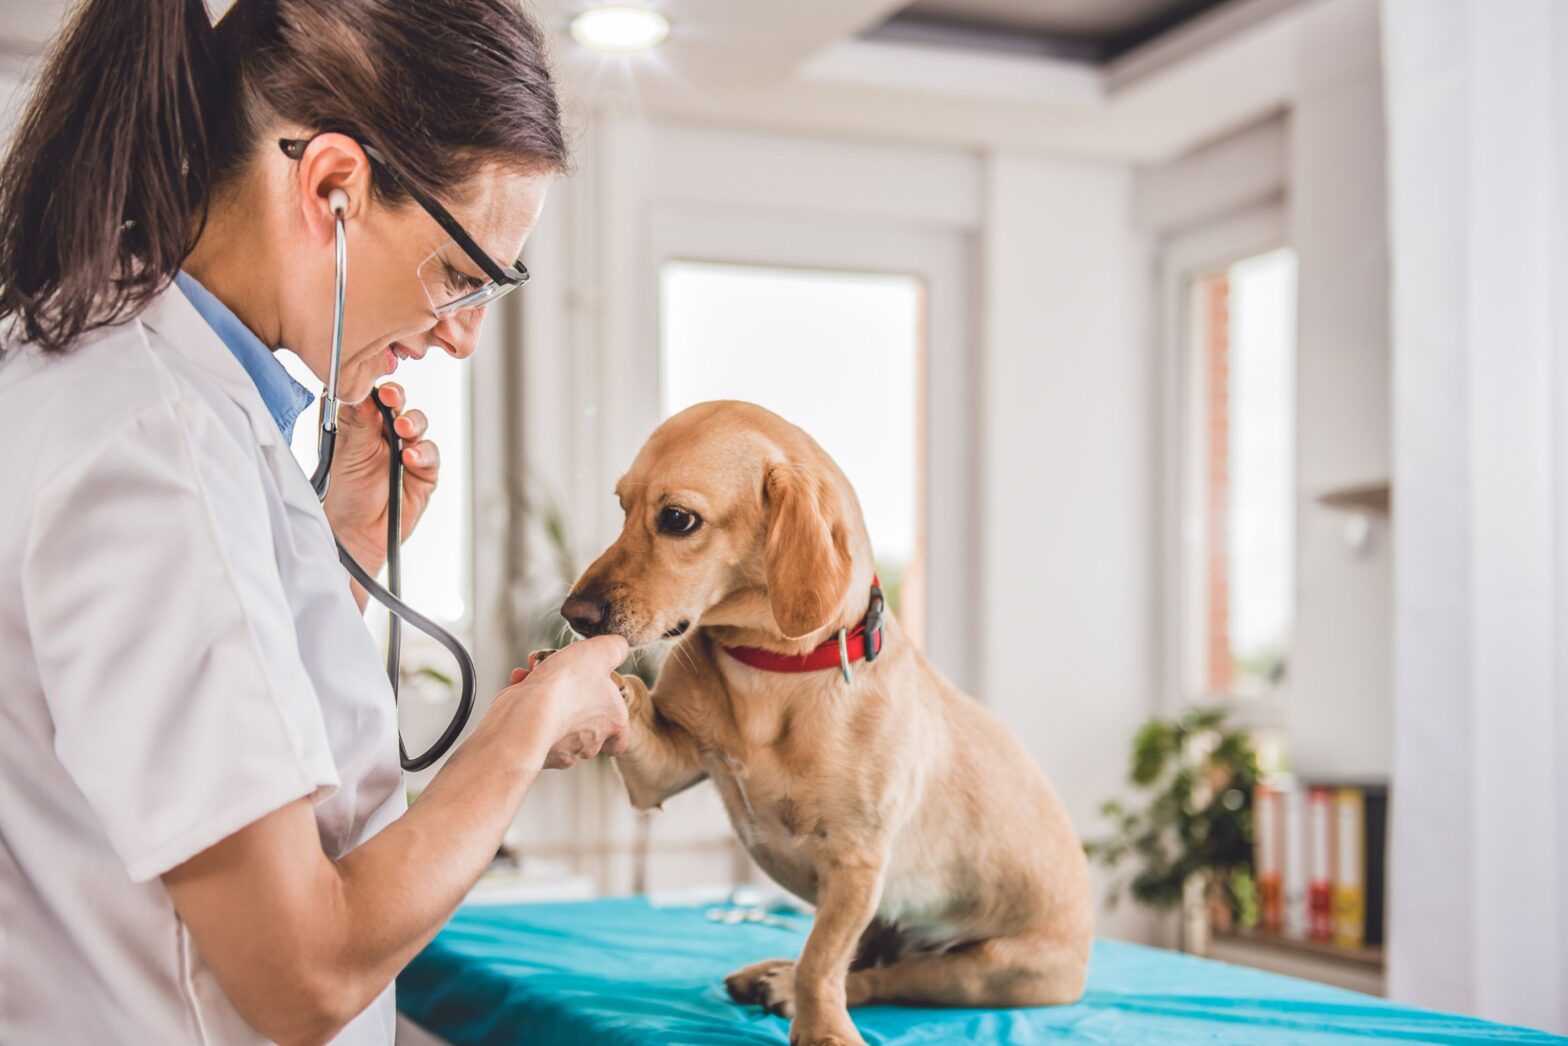 Veterinary Services Industry